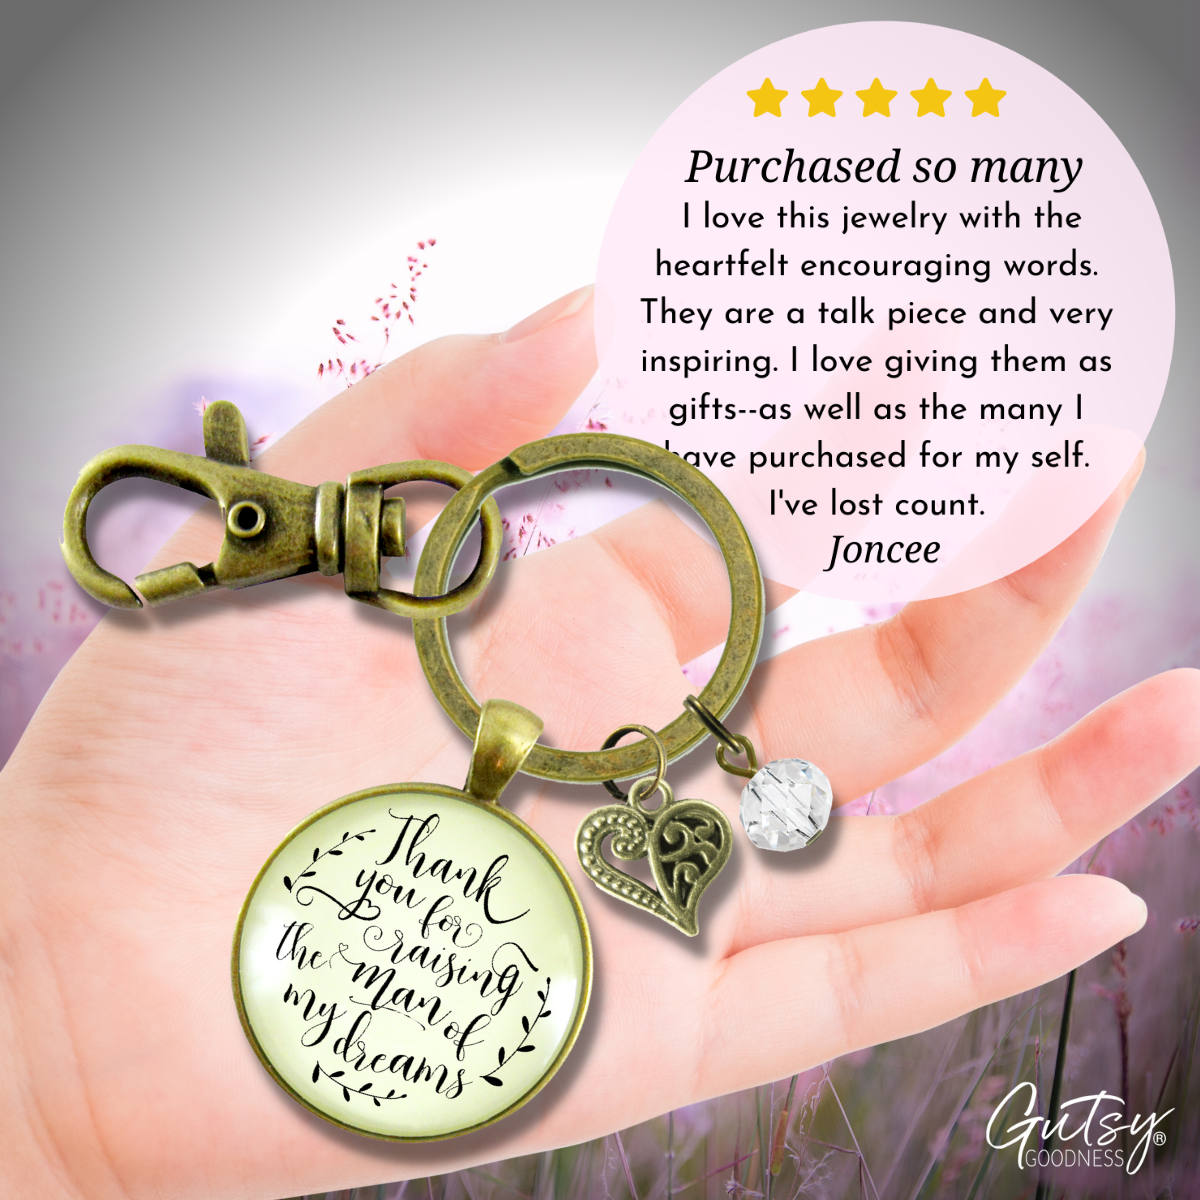 To Her Mother in Law Keychain Thank You Raising Man I Dreamed Wedding Gift  Keychain - Women - Gutsy Goodness Handmade Jewelry